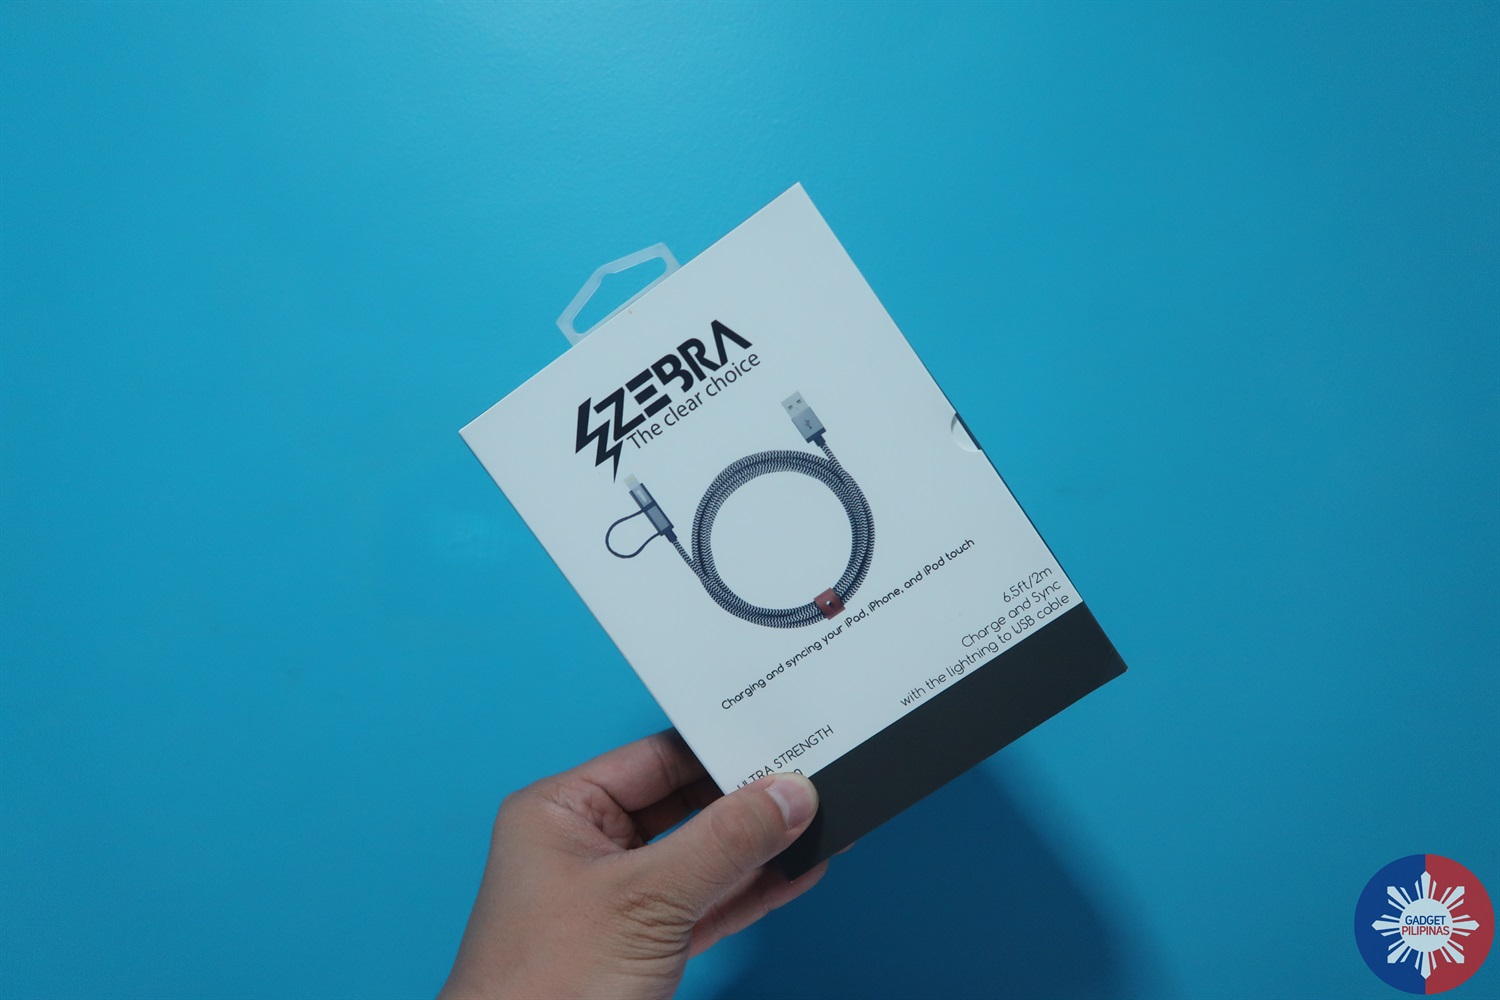 2-Meter Zebra Cable may be one of the best cable buddies for the new iPad Pro and other smartphones